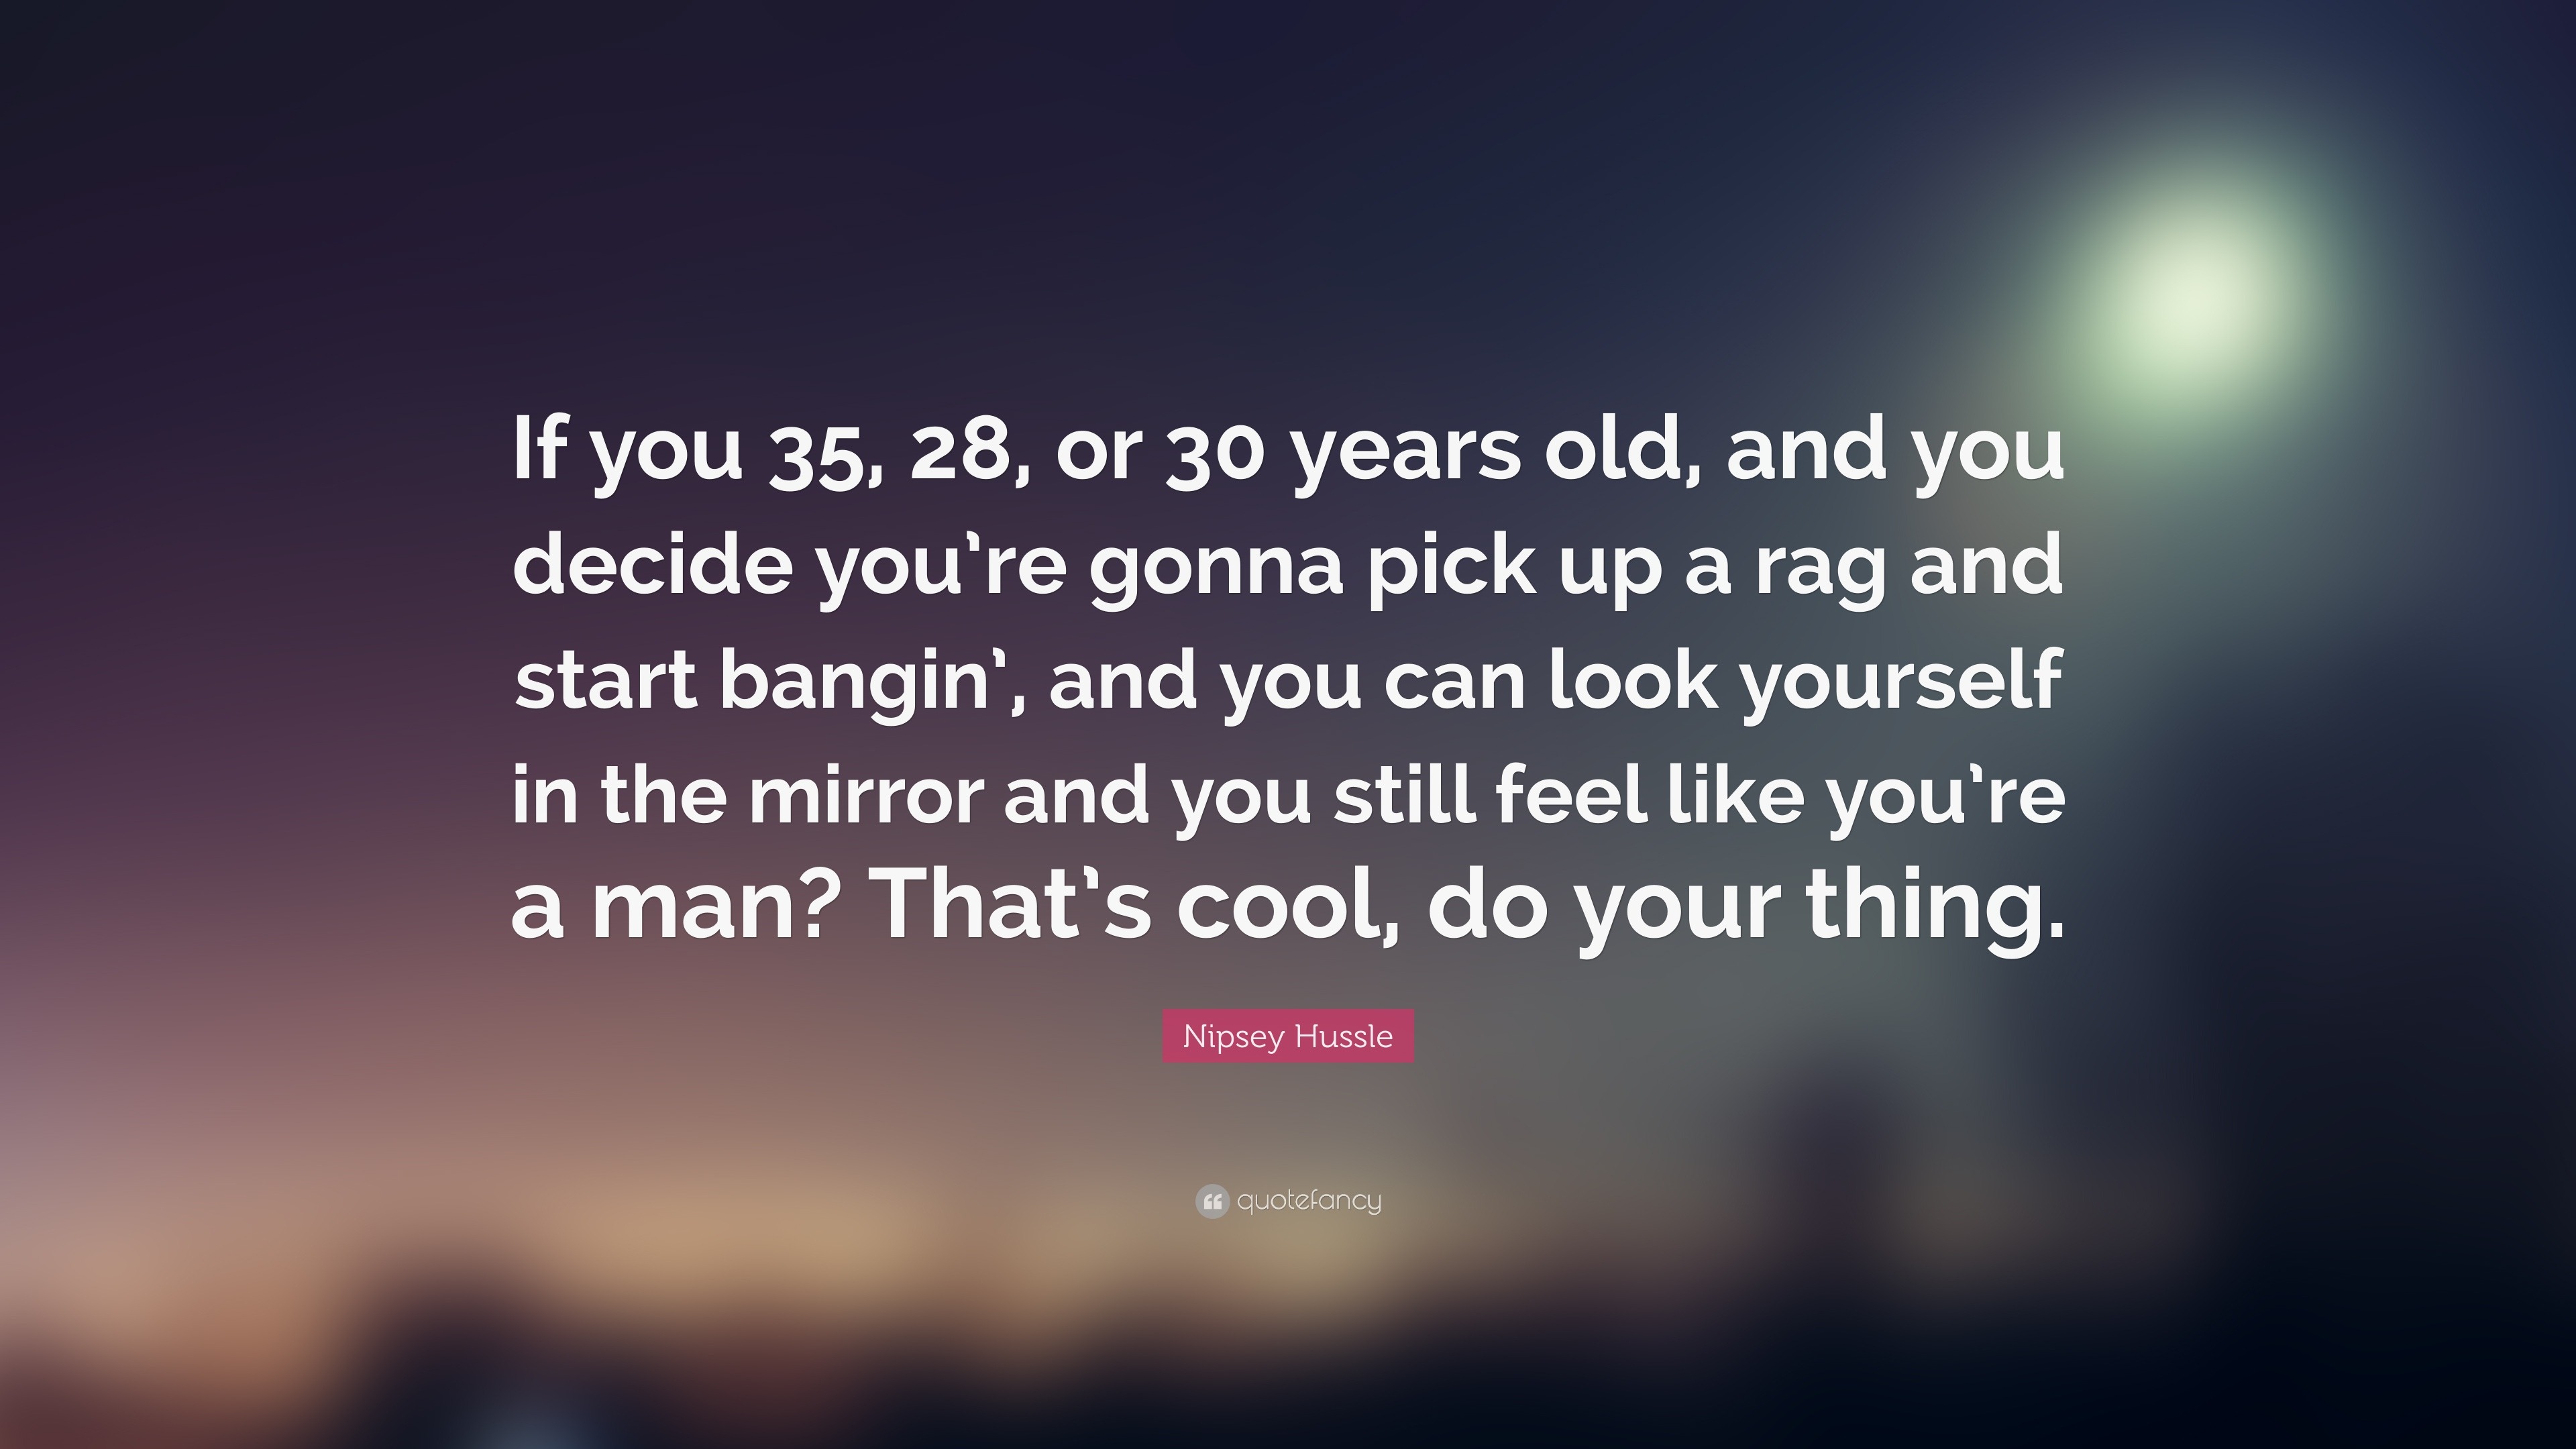 Nipsey Hussle Quote: "If you 35, 28, or 30 years old, and ...